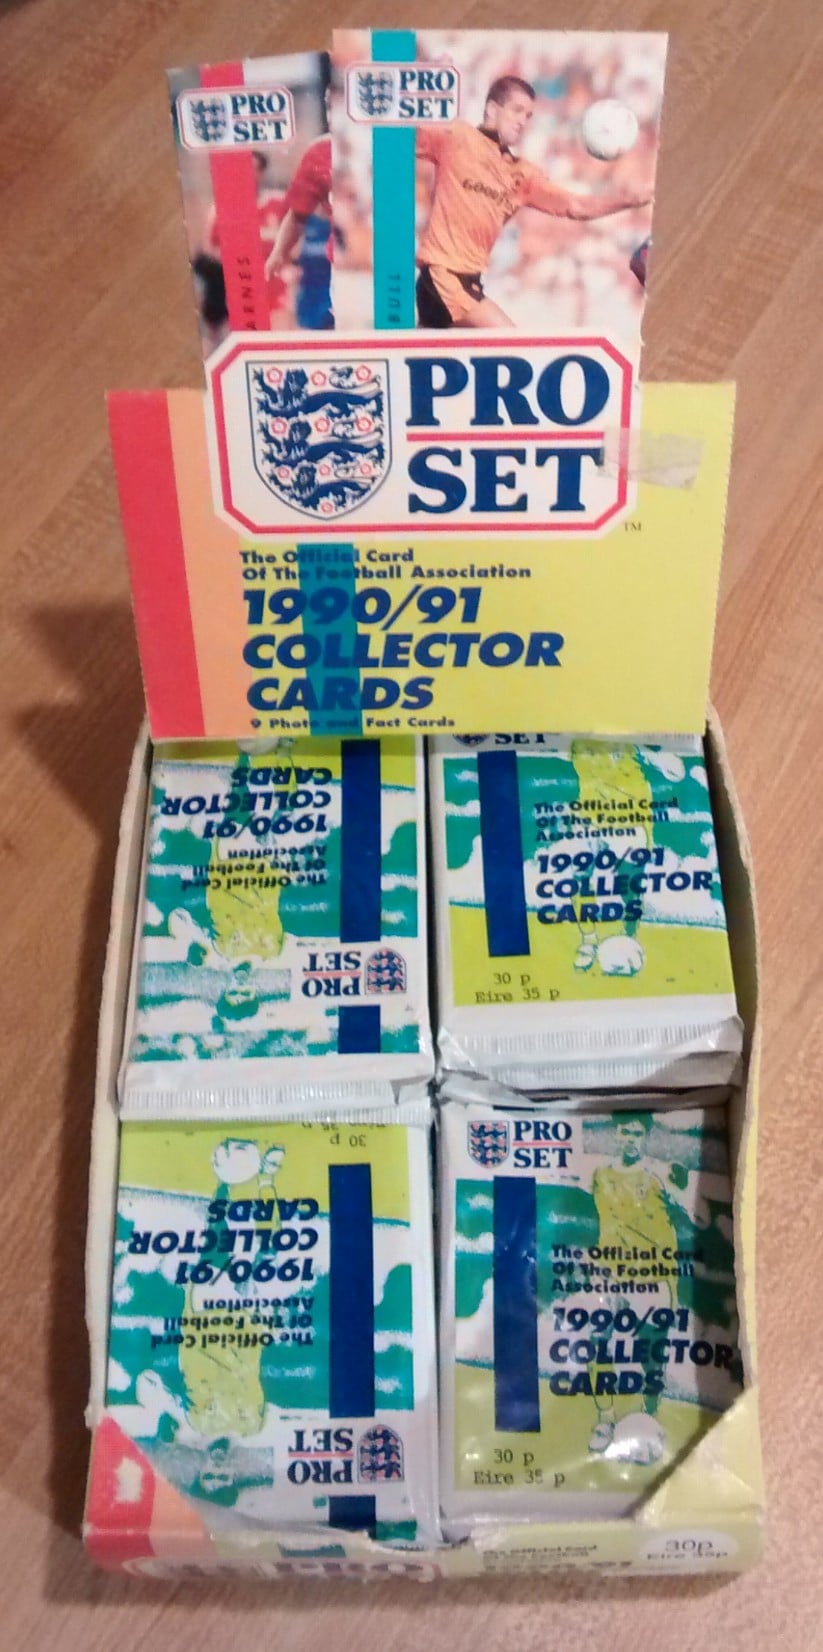 New 90-91 FA Pro Set Collectors Trading Cards Un-Opened Pack 